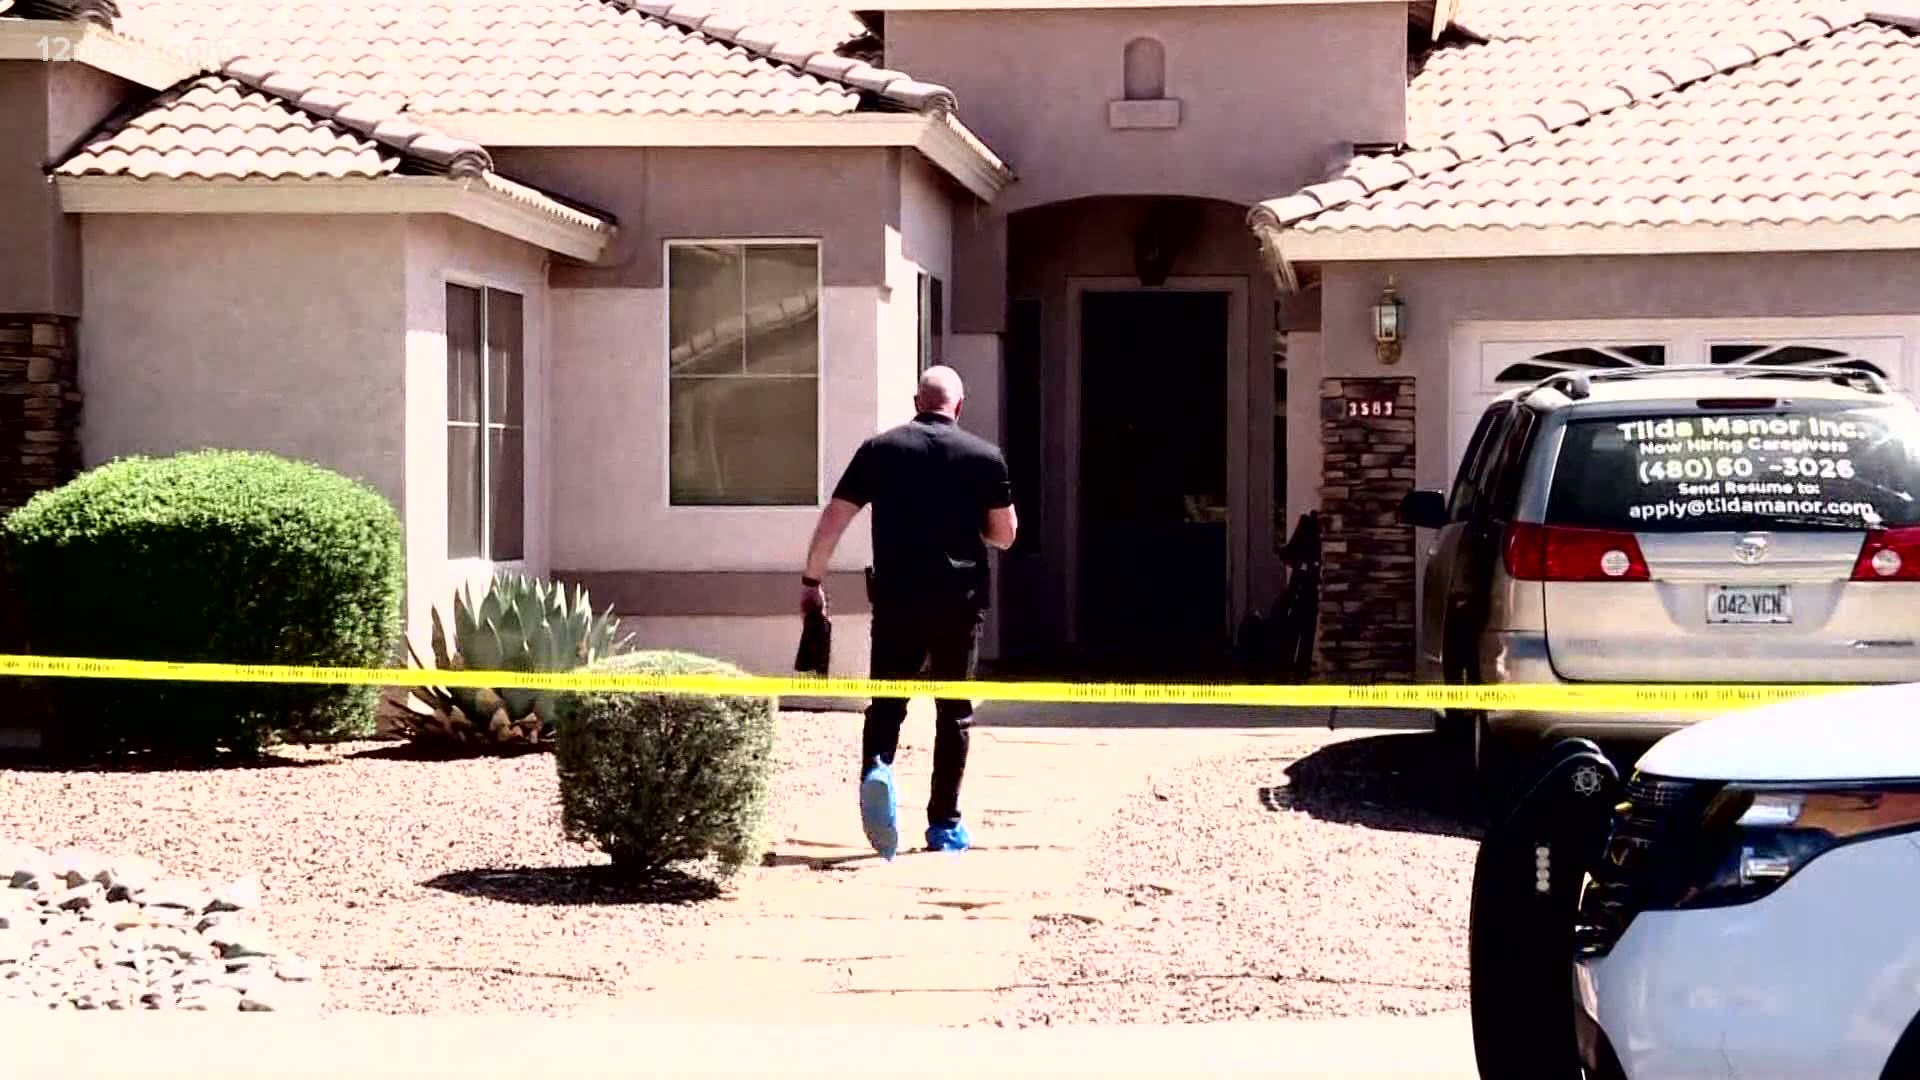 Neighbors in Gilbert are demanding more transparency in the wake of a murder investigation at a group home where a resident was arrested for killing another resident